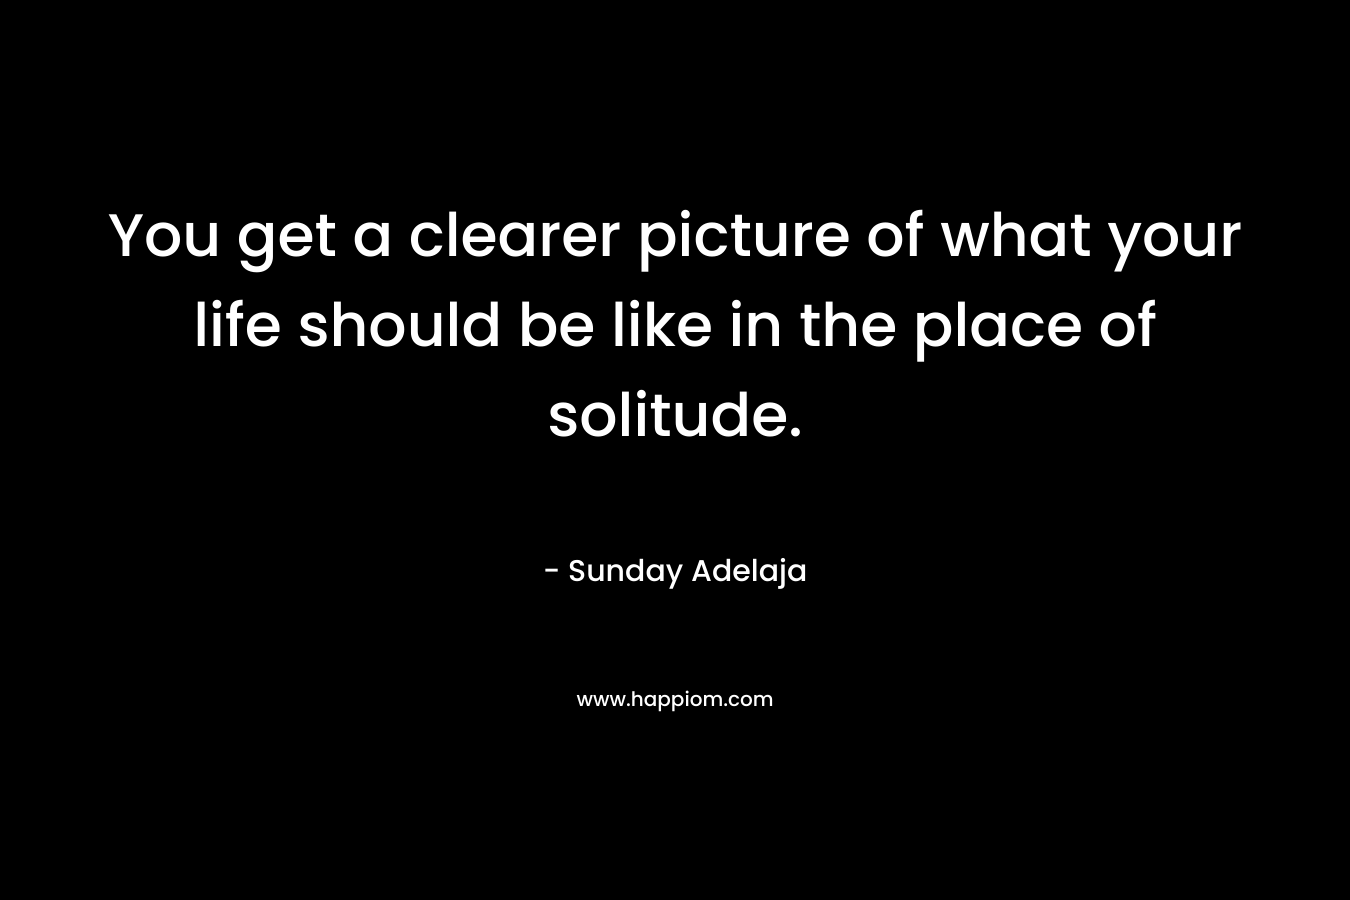 You get a clearer picture of what your life should be like in the place of solitude.